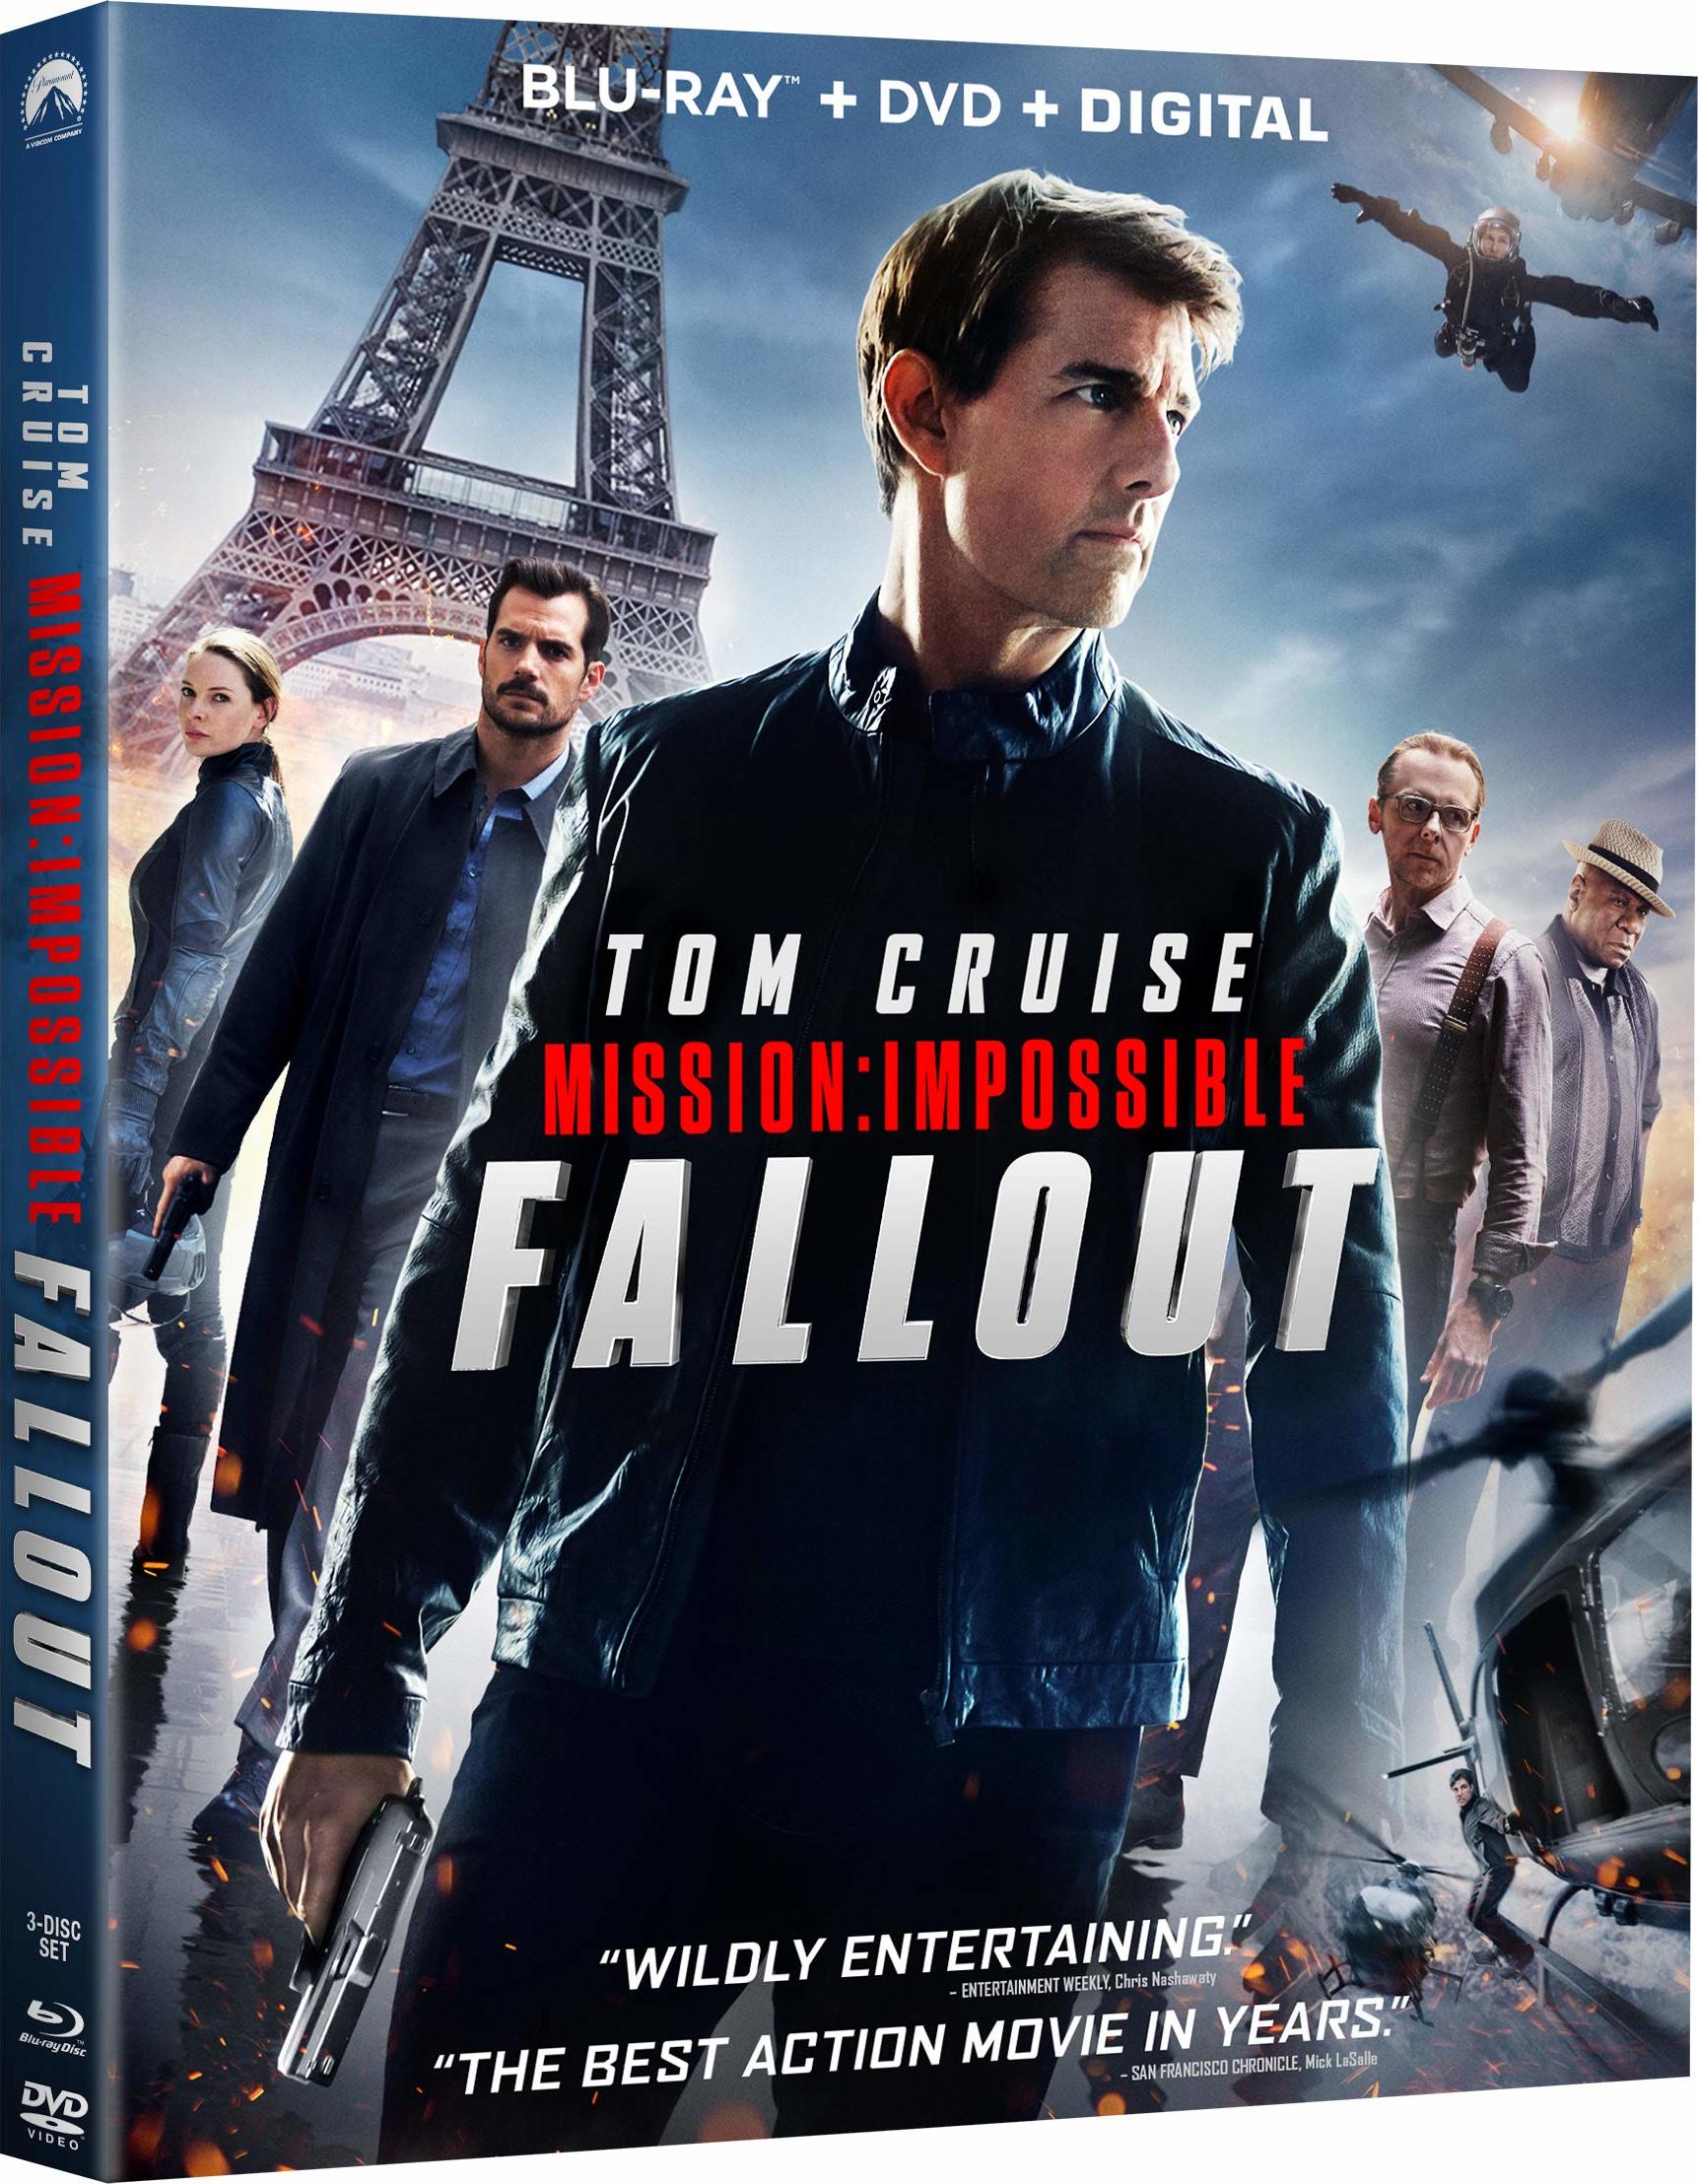 2018 - Mission: Impossible - Fallout (2018) Misión Imposible: Fallout (2018) [AC3 5.1 + SUP] [Blu Ray-Rip] - Página 2 210308_front